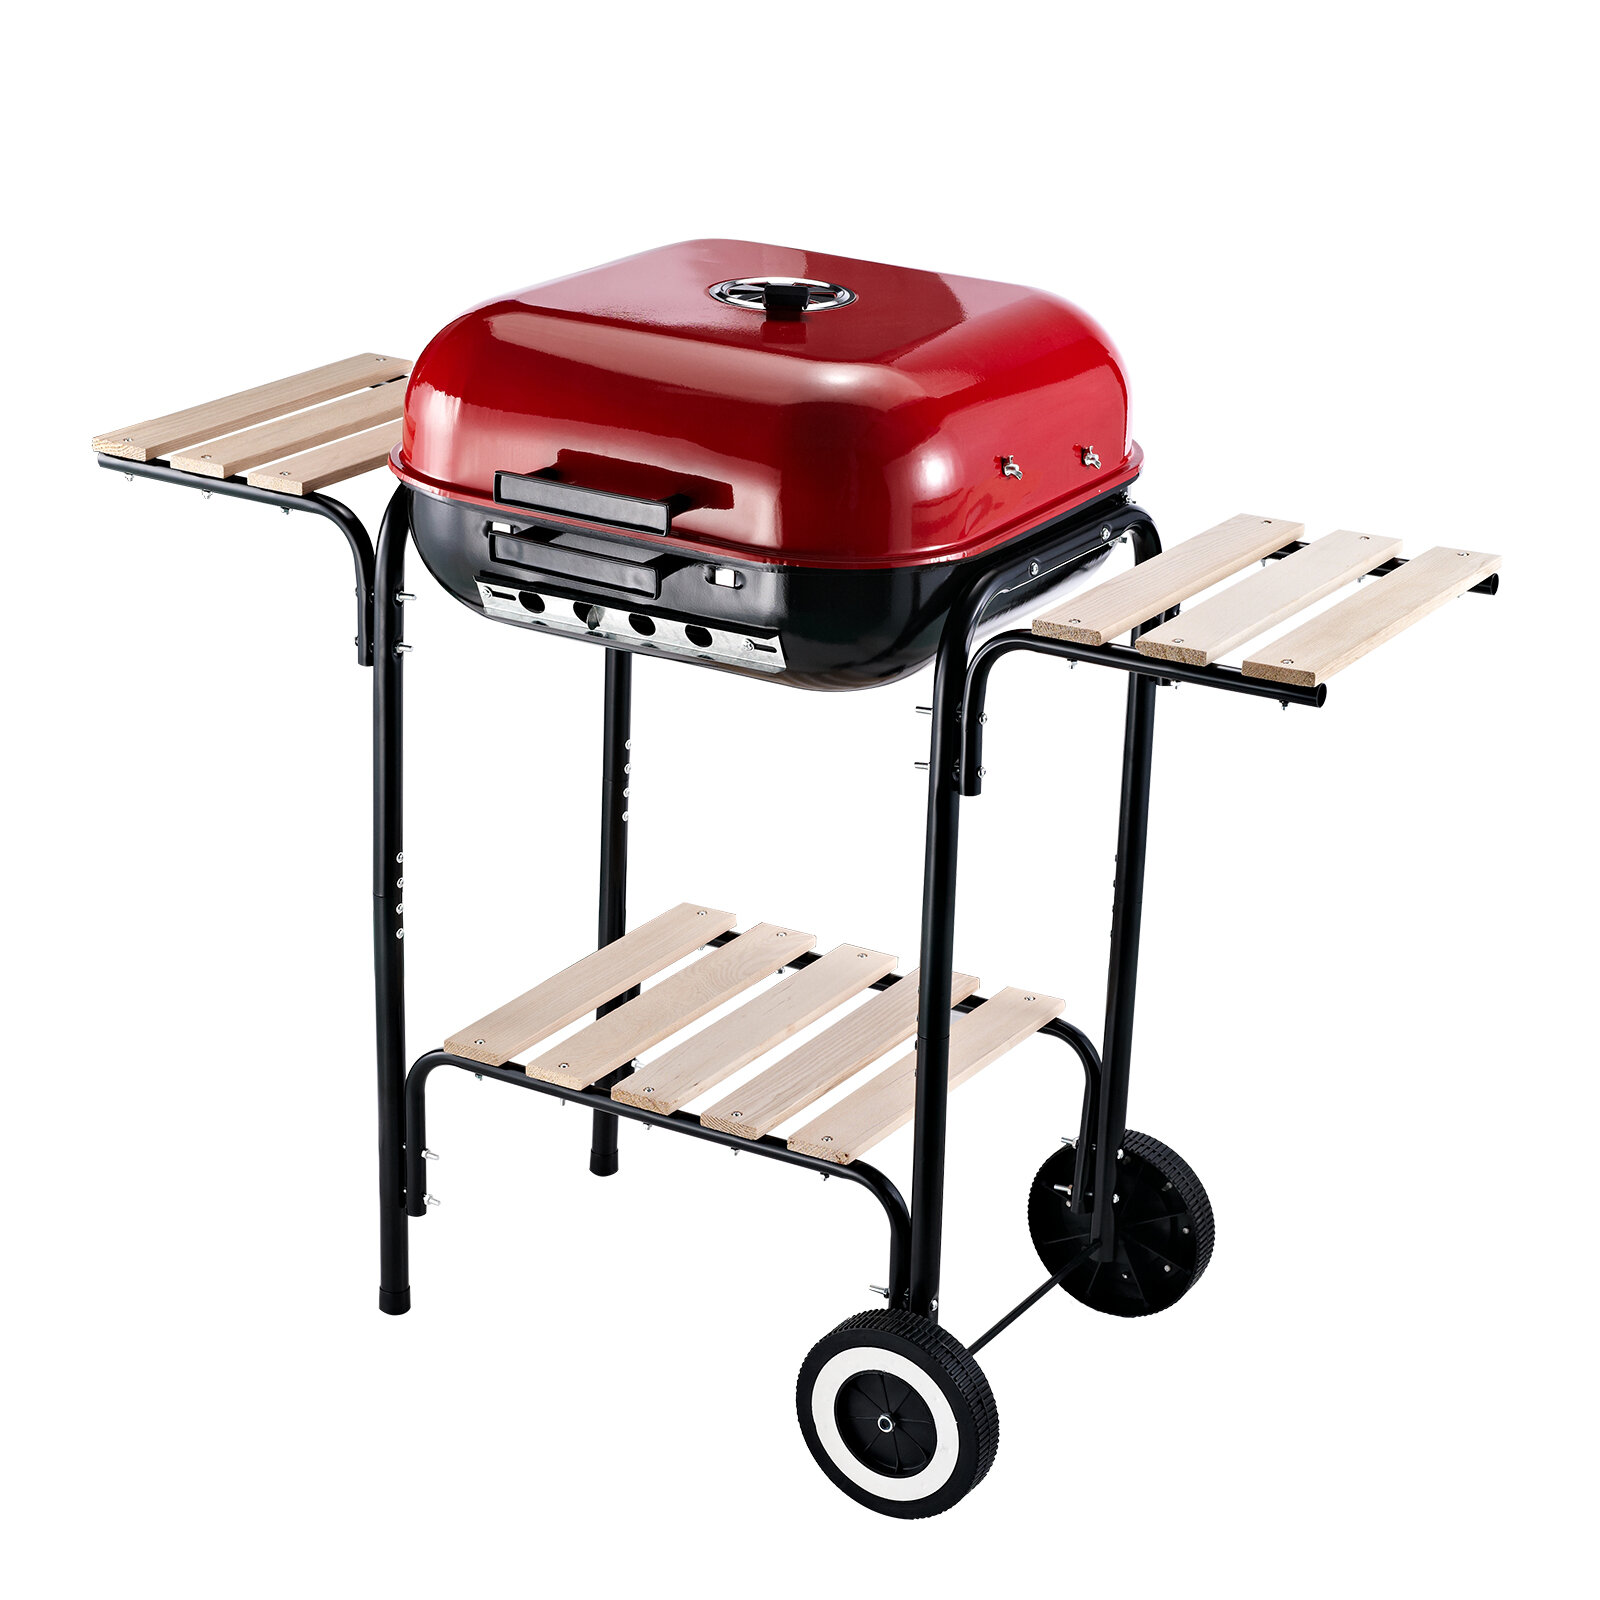 19.5" Outdoor BBQ Portable Charcoal Grill Reviews